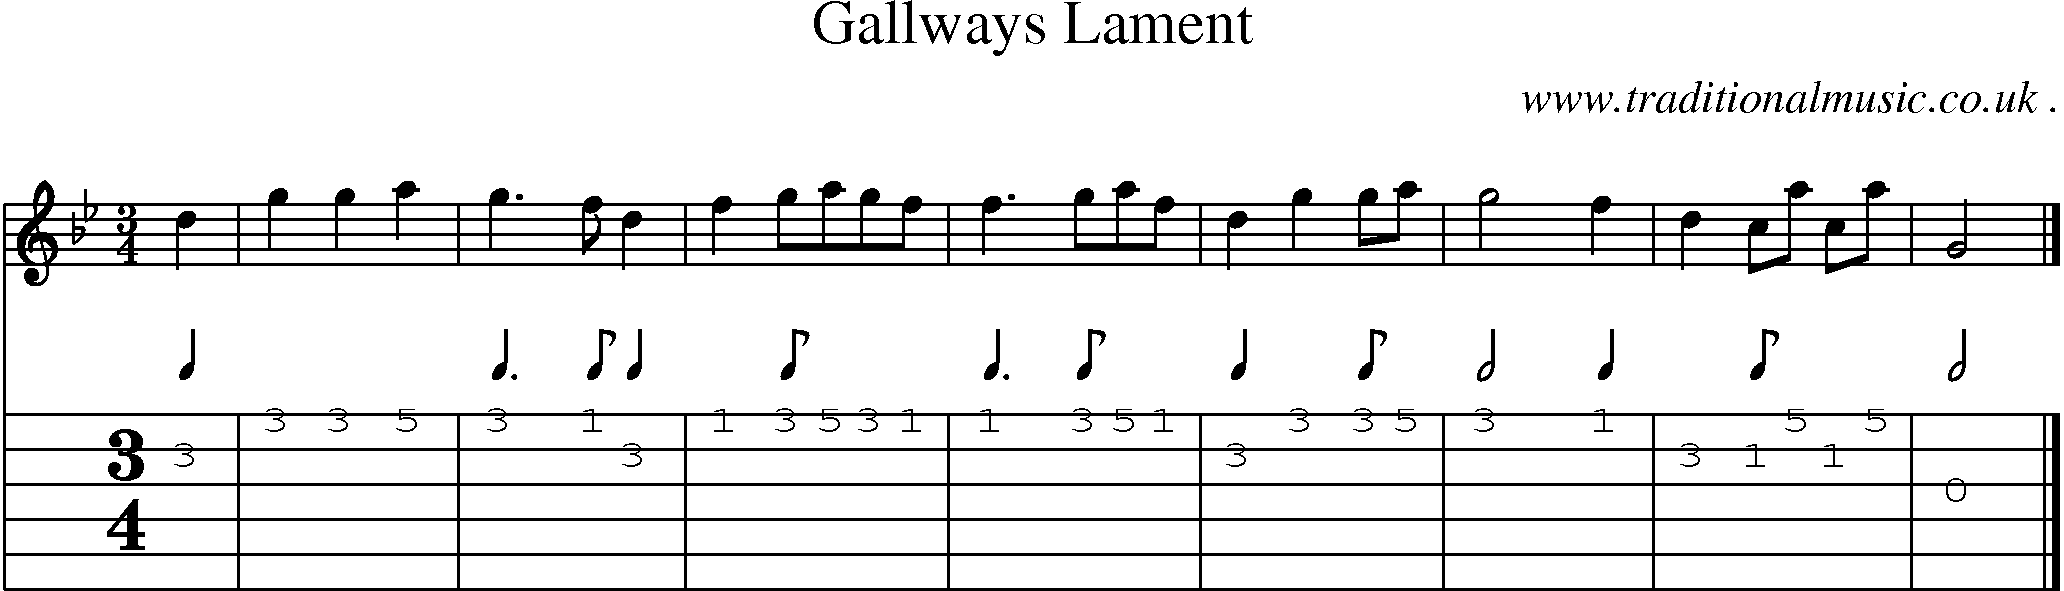 Sheet-music  score, Chords and Guitar Tabs for Gallways Lament